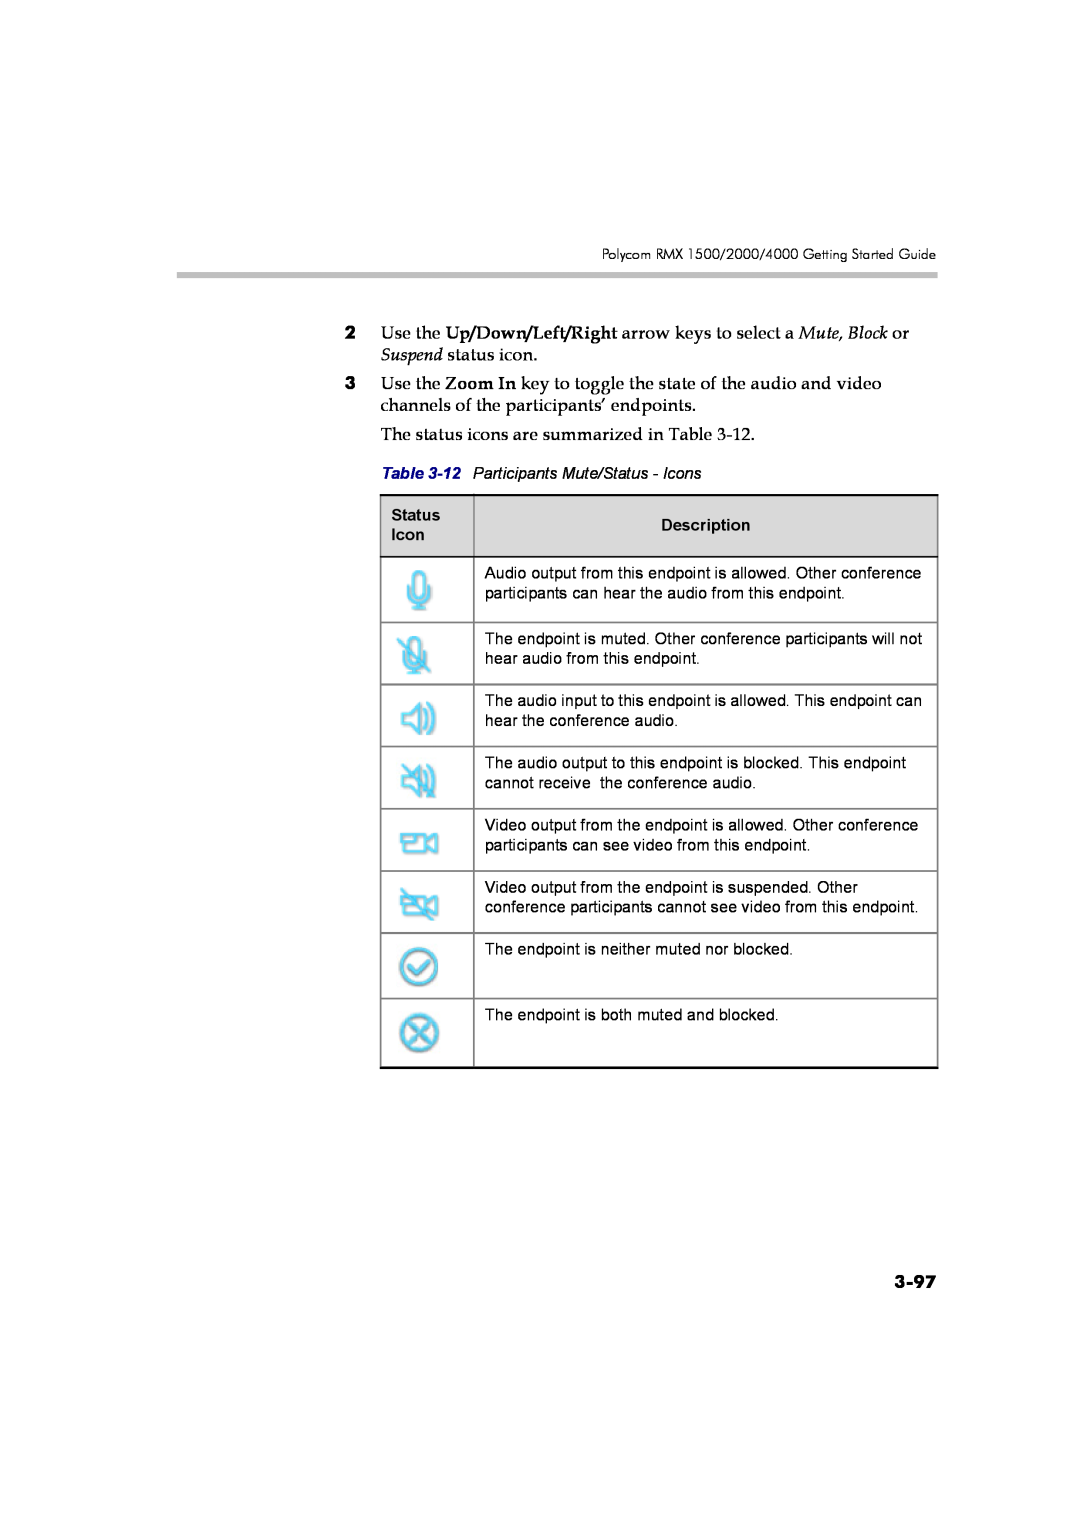 Polycom DOC2560B manual 3-97, The status icons are summarized in Table 